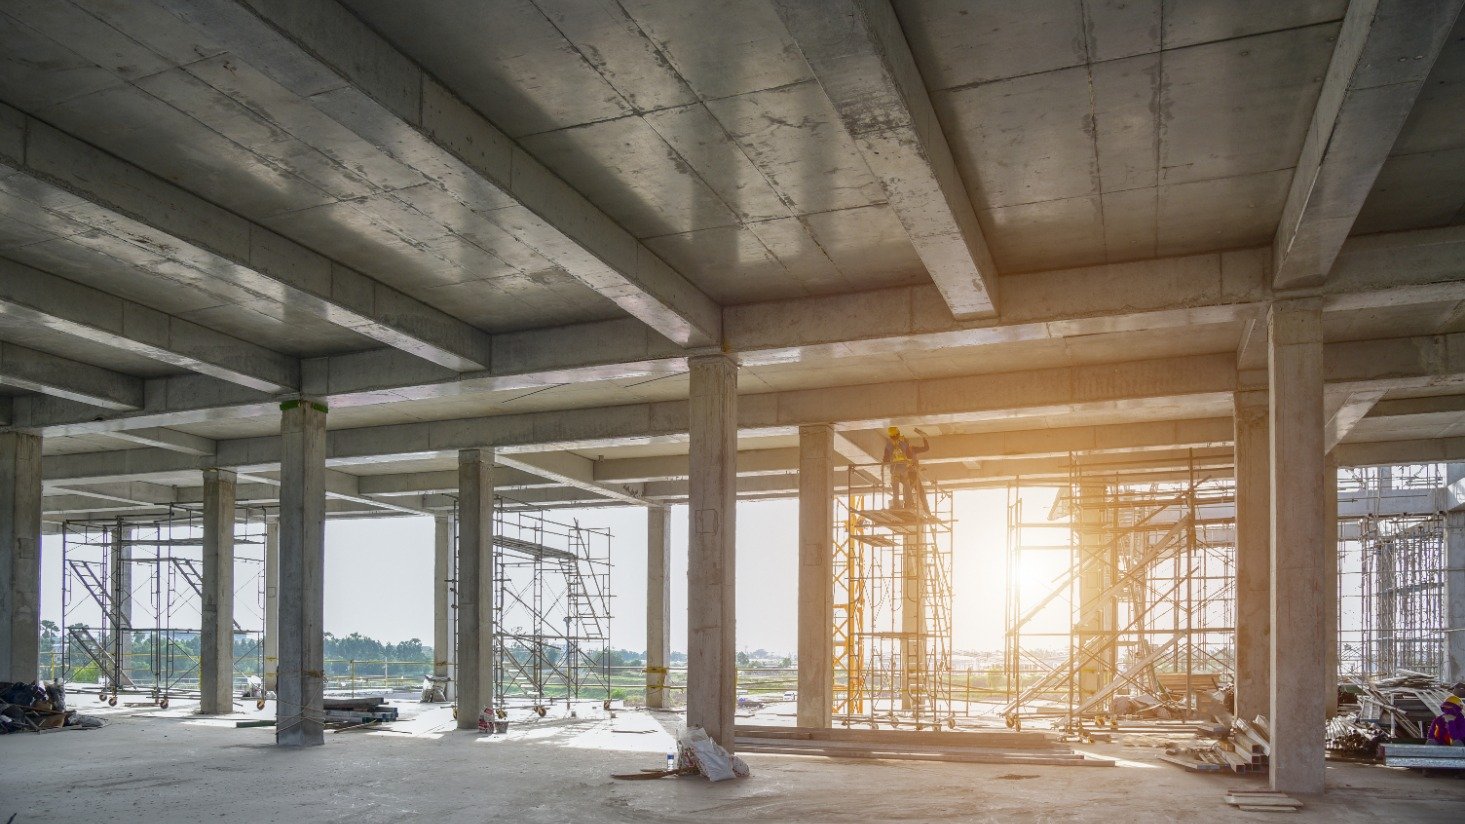 4 reasons lighting causes developers' schedules to fall behind on construction projects